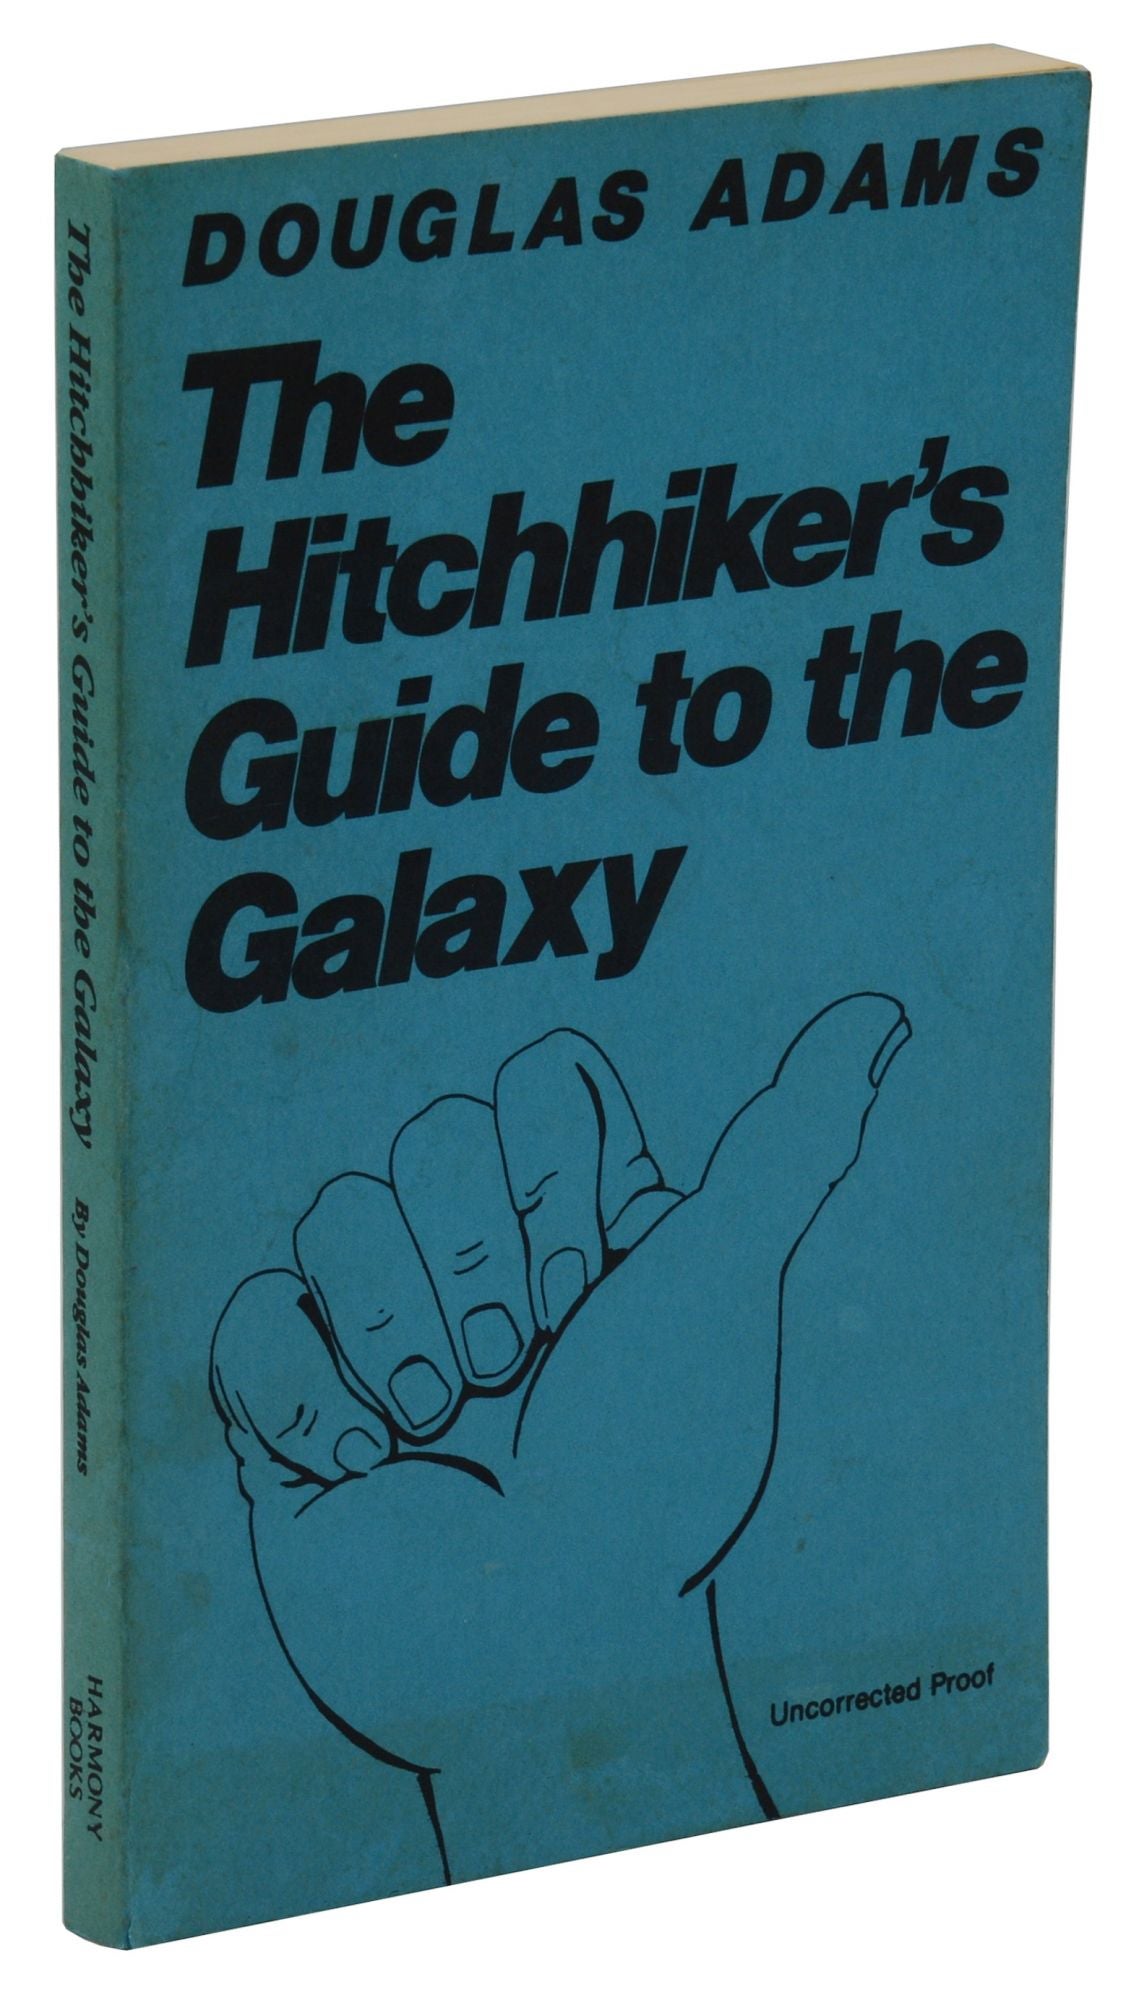 The　Hitchhiker's　Edition　Guide　Douglas　to　the　Proof　the　Galaxy　Adams　Uncorrected　of　First　American